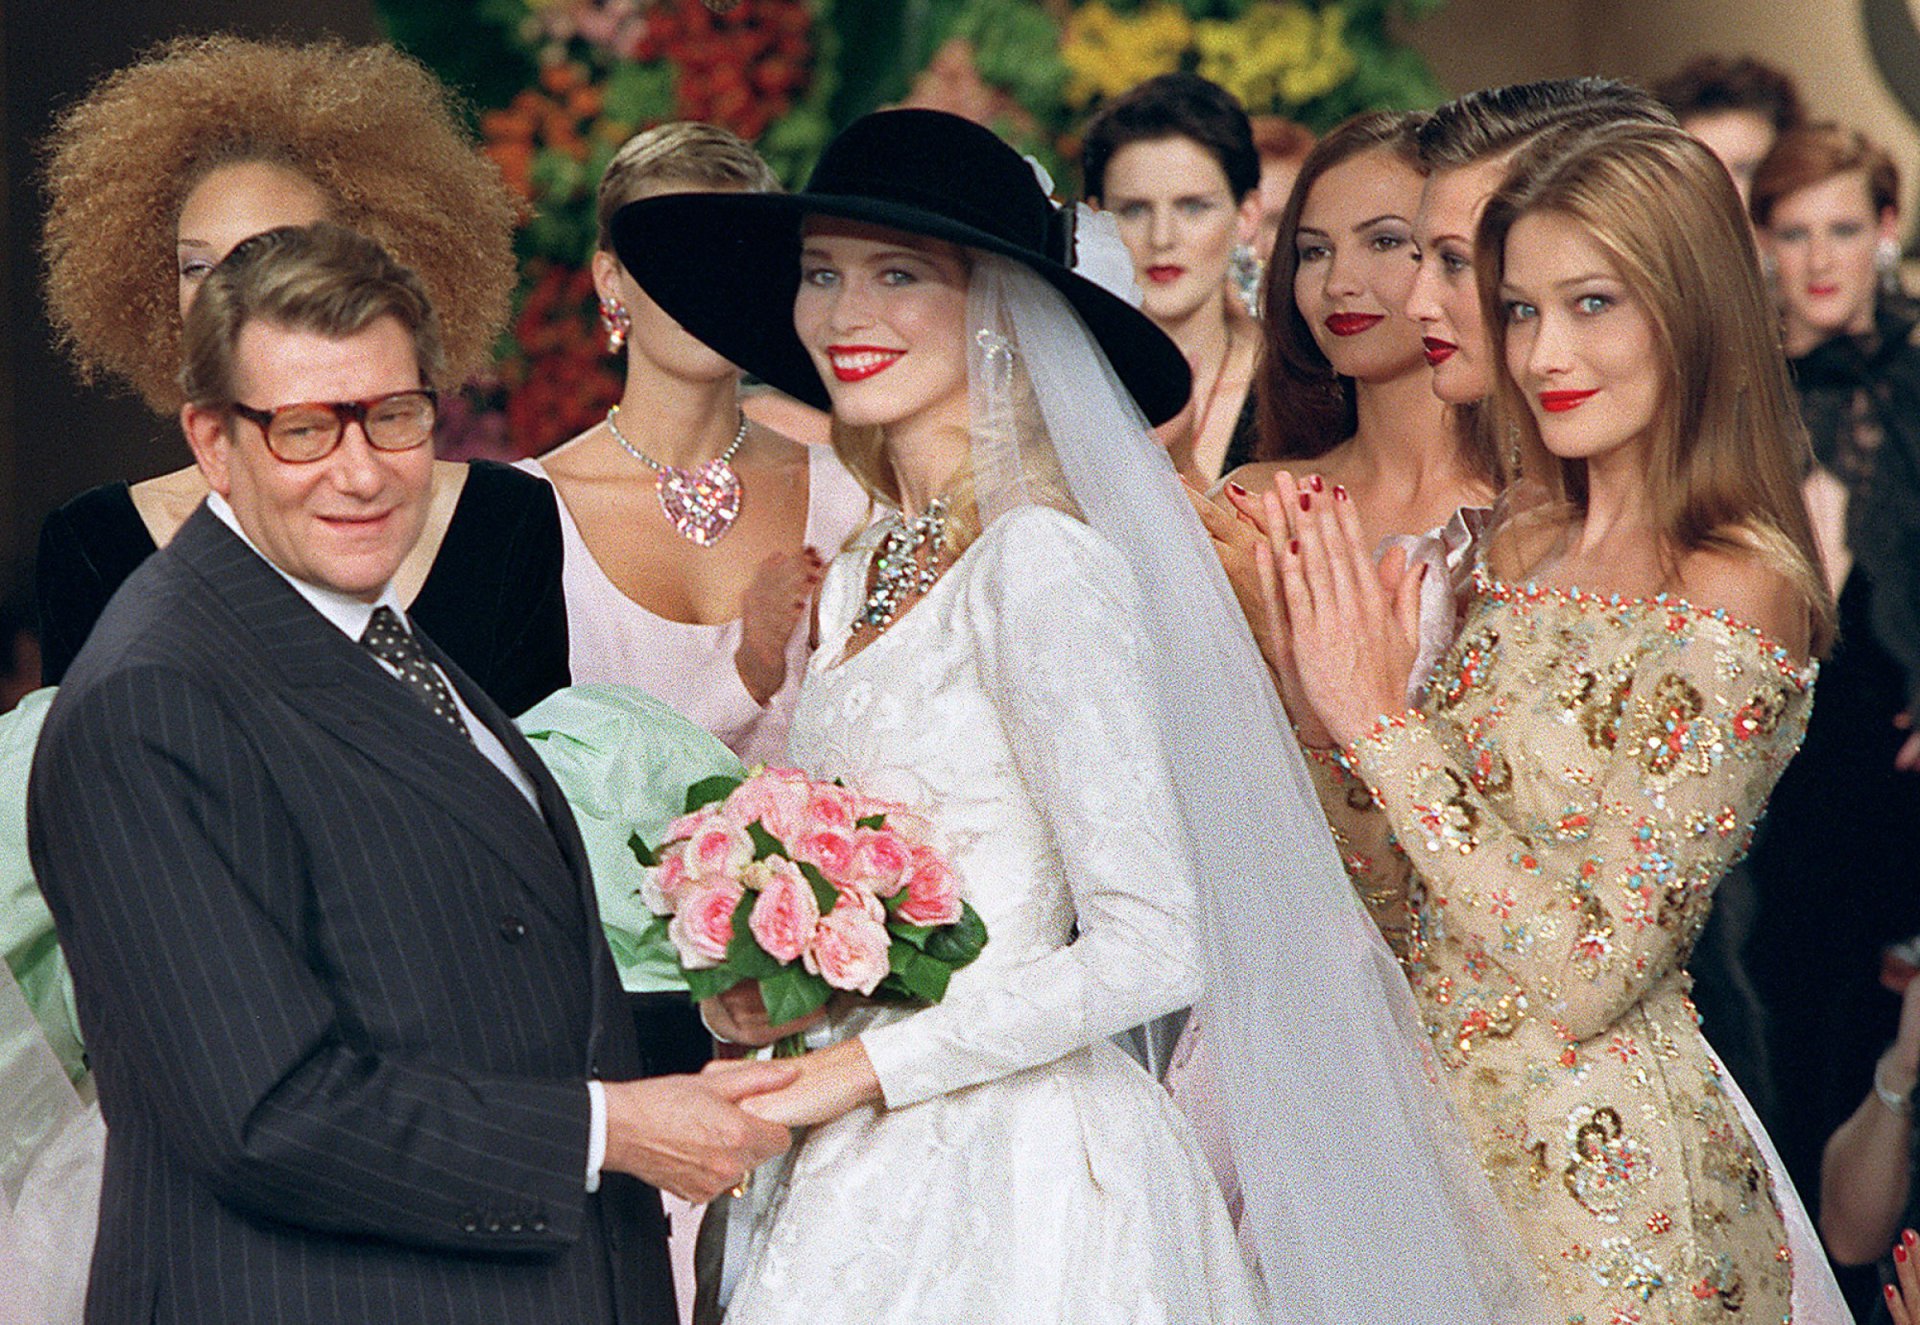 Photo taken on July 10, 1996 shows French fashion designer Yves Saint Laurent (L) posing with models Claudia Schiffer (C) and Carla Bruni during the presentation of the autumn-winter 96/97 haute couture collection in Paris. Saint Laurent, widely hailed as one of the greatest designers of the 20th century, died on June 1, 2008 in Paris. He was 71. AFP PHOTO PIERRE VERDY